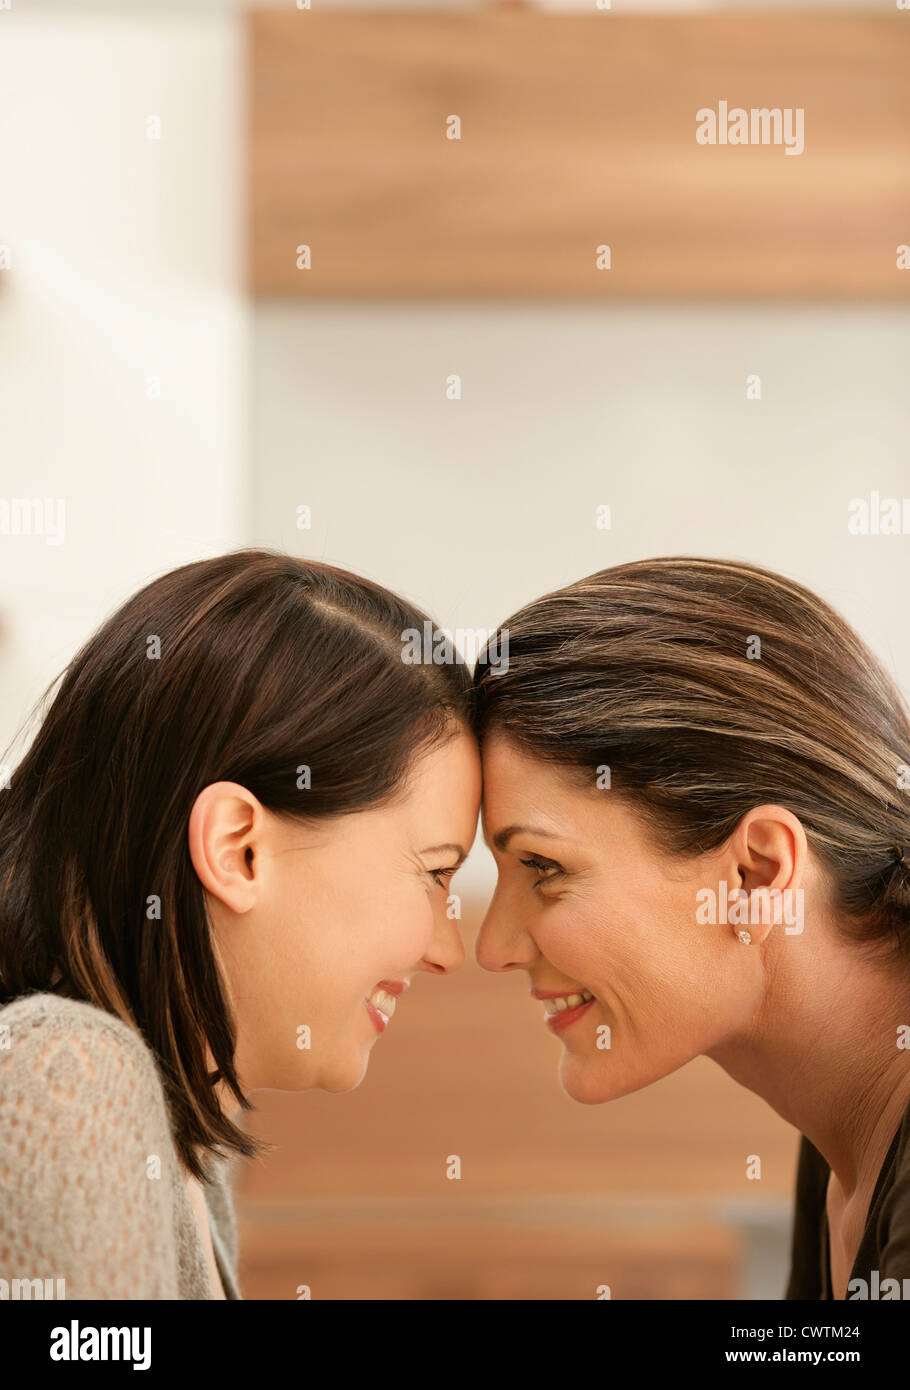 Smiling mother and adult daughter head to head Stock Photo